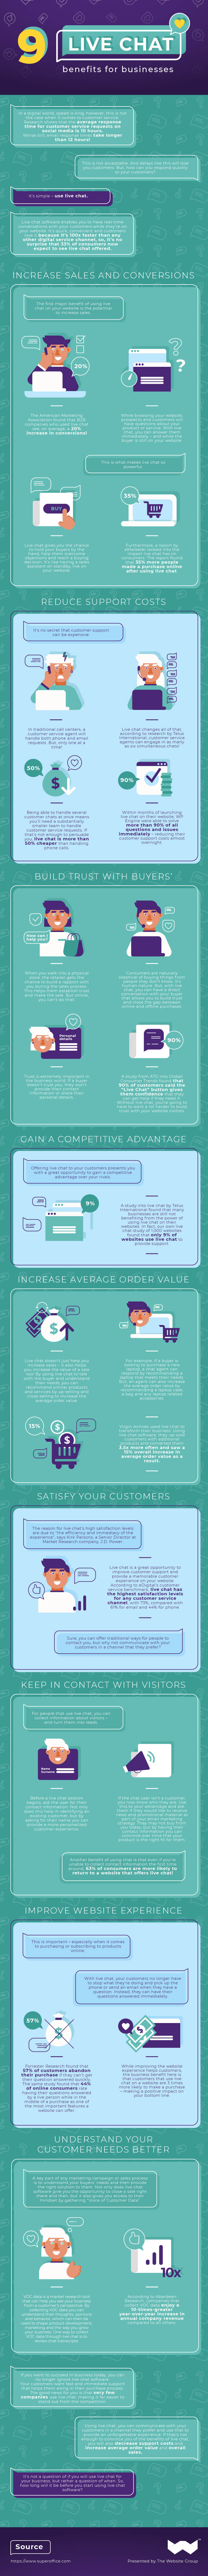 benefits of live chat infographic